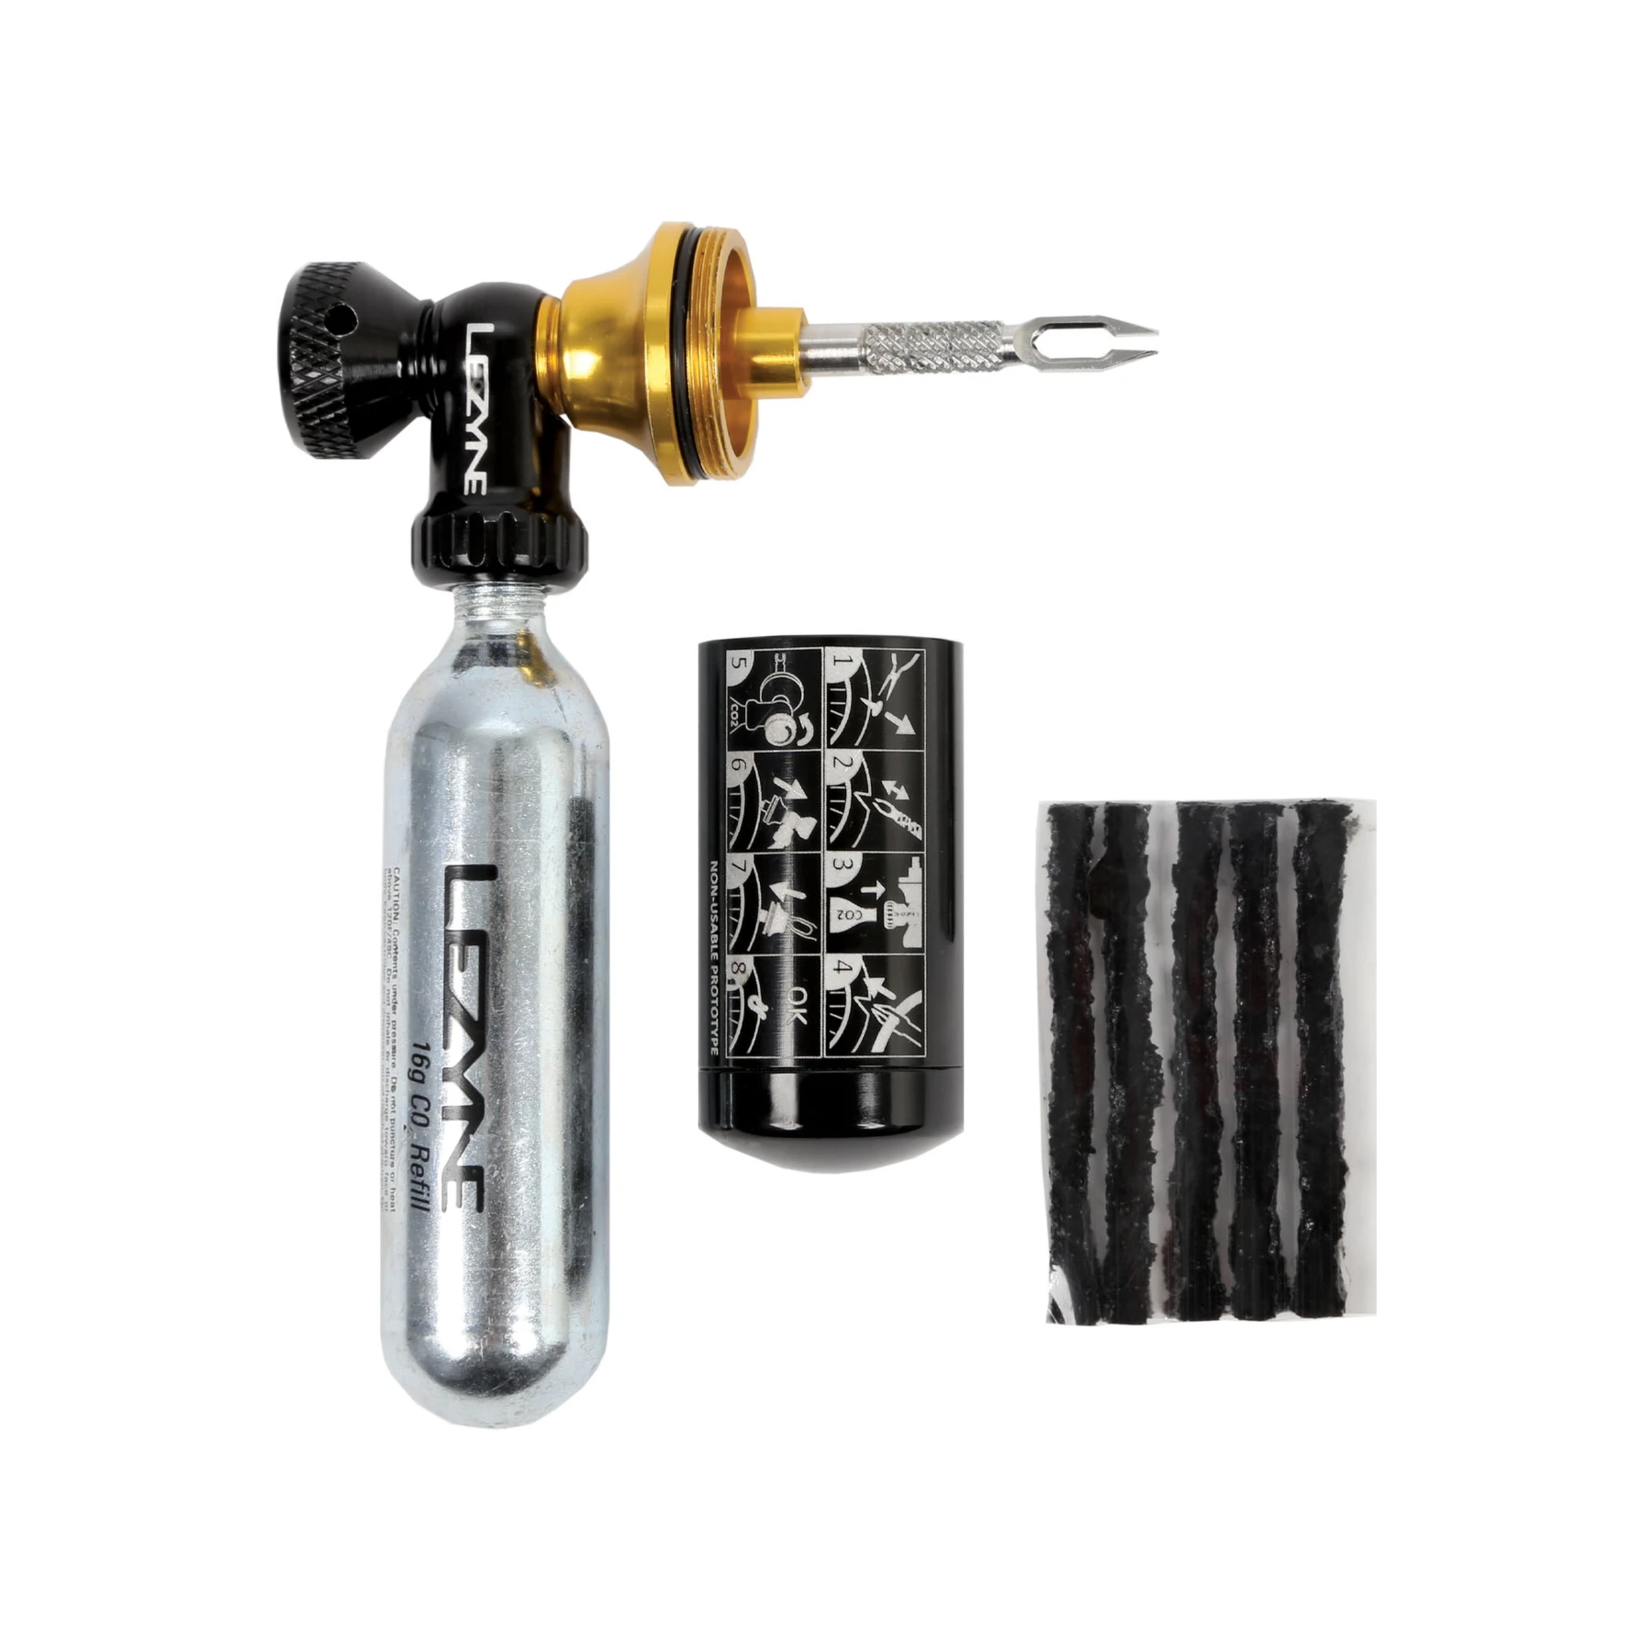 LEZYNE CO2 Blaster Inflater and Tubeless Repair Kit with two 20g Cartridges